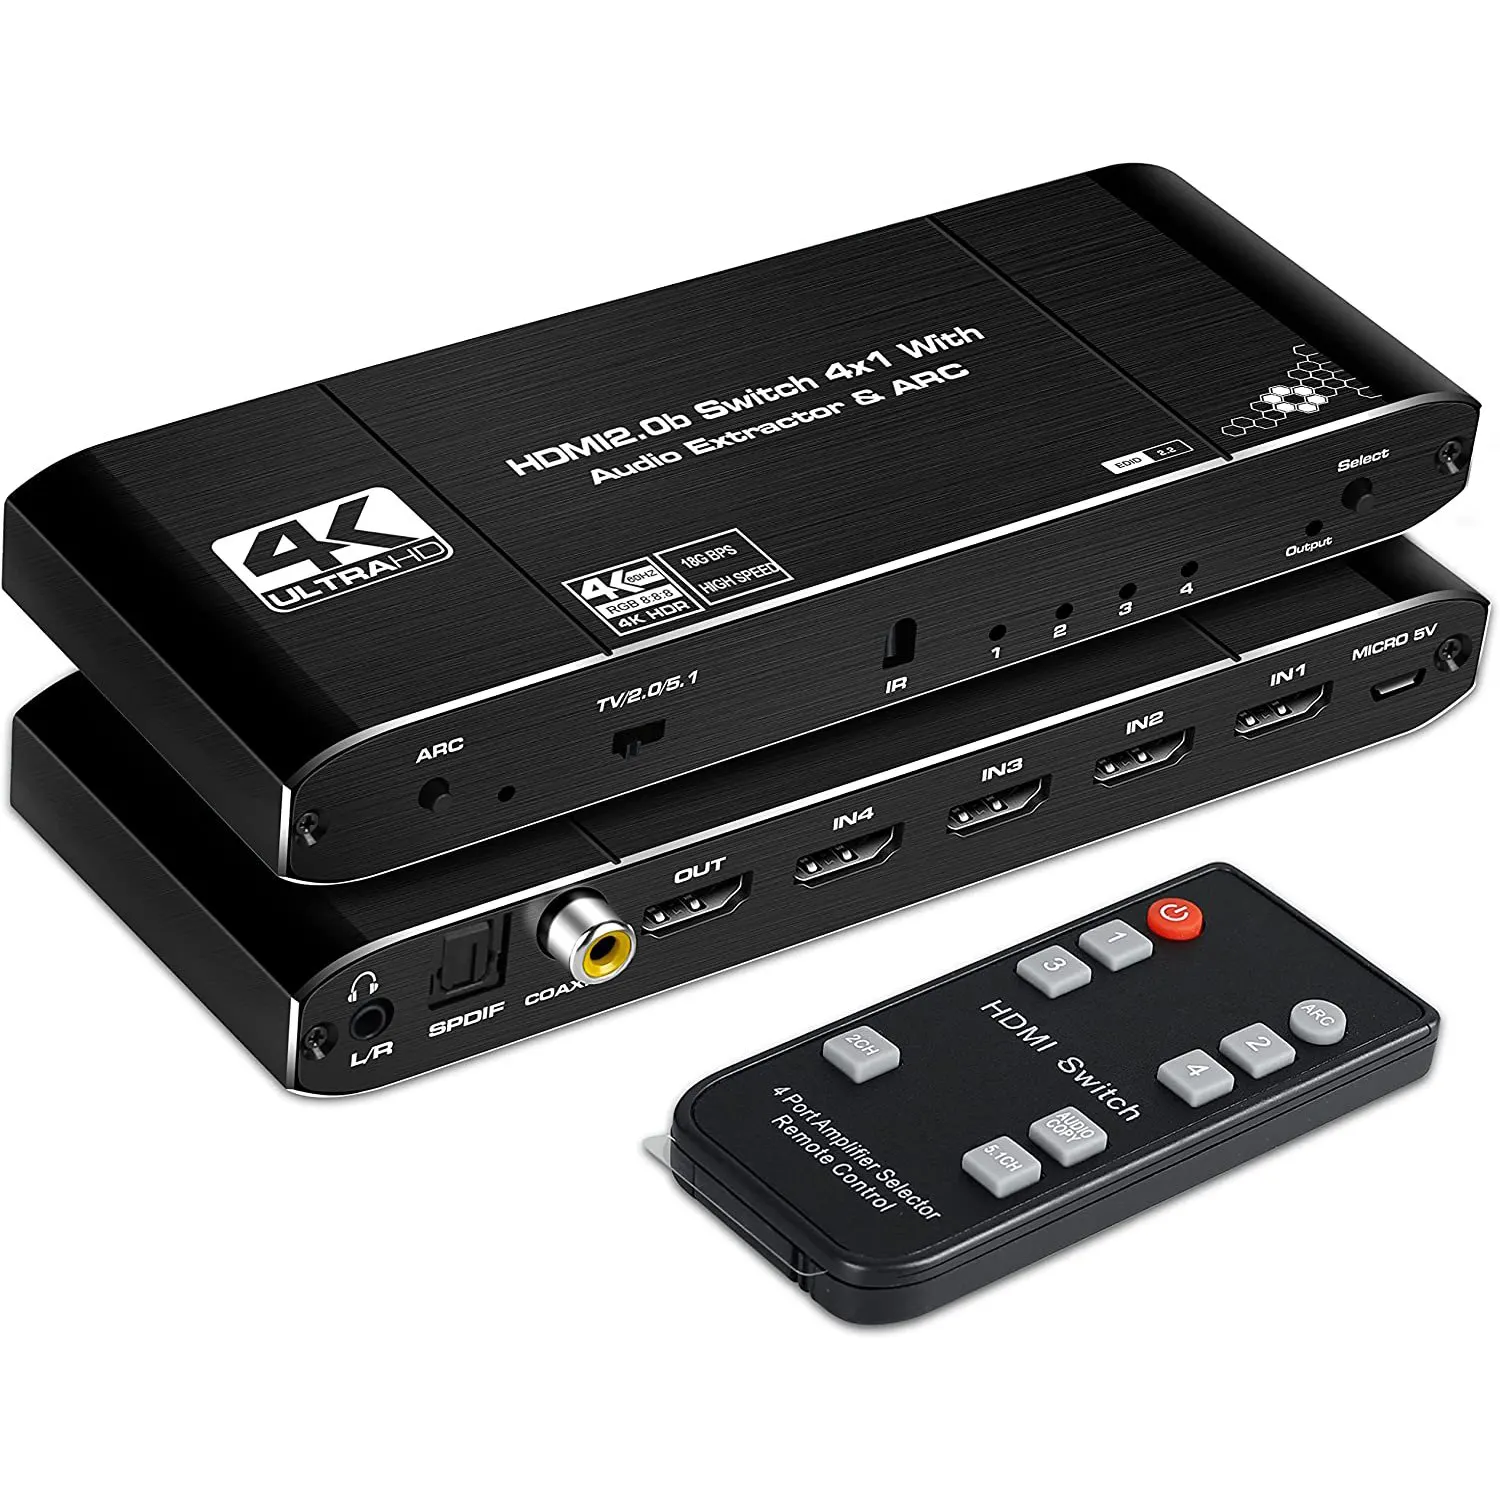 4K HDMI Switch Audio Output 4-port HDMI Switcher 2.0b 4x1 with ARC Coaxial Toslink 3.5mm with IR Remote Control Hdmi switch